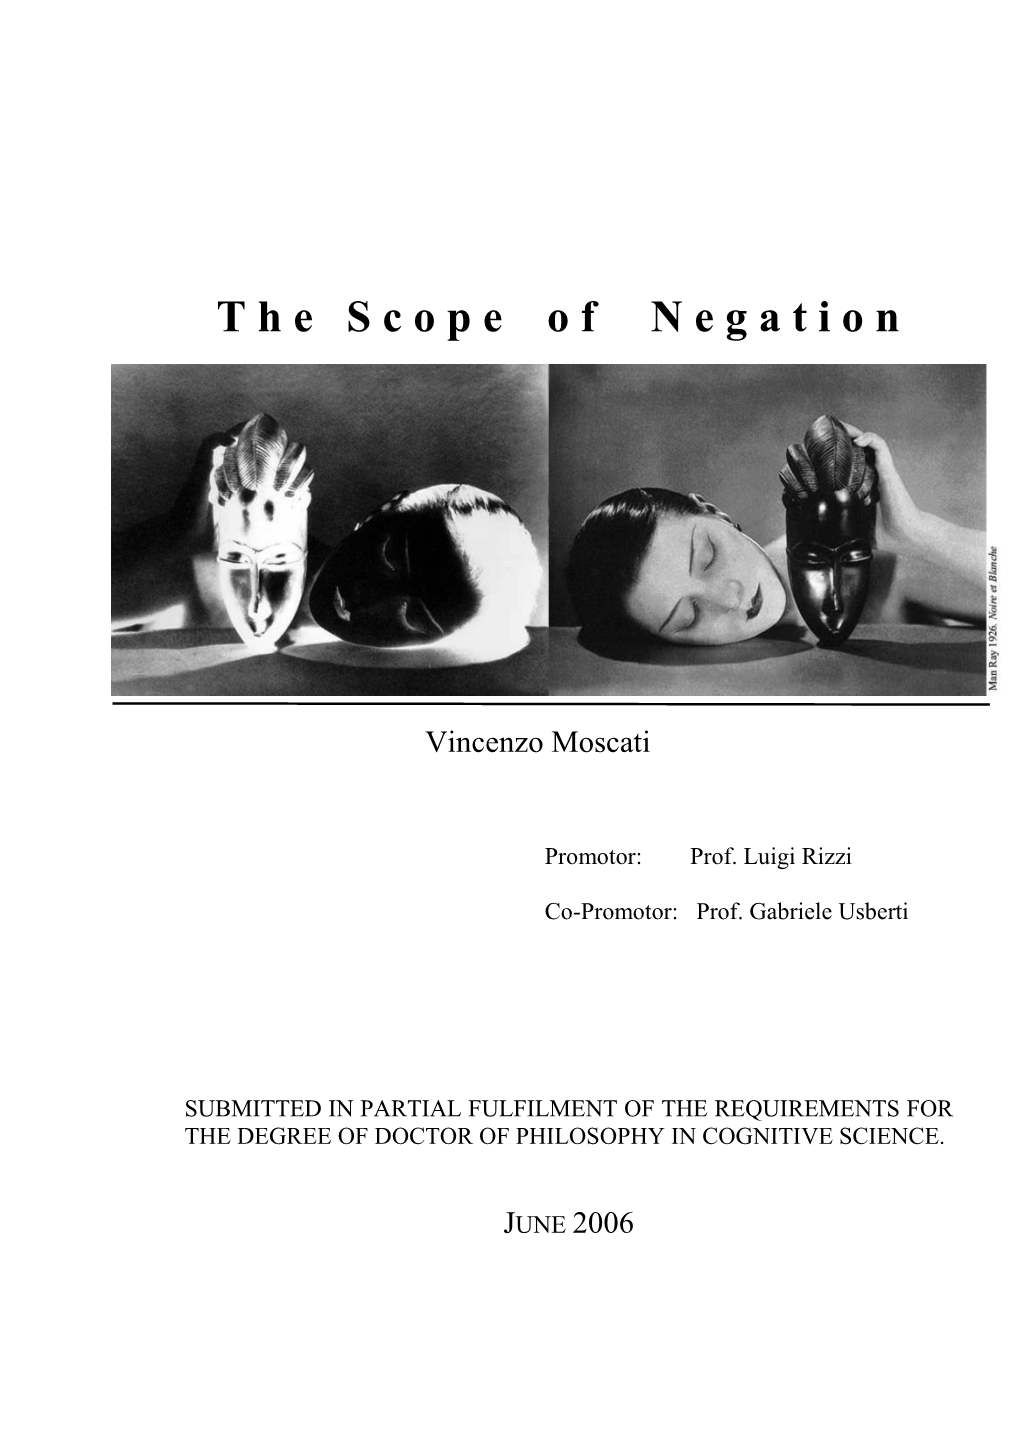 The Scope of Negation